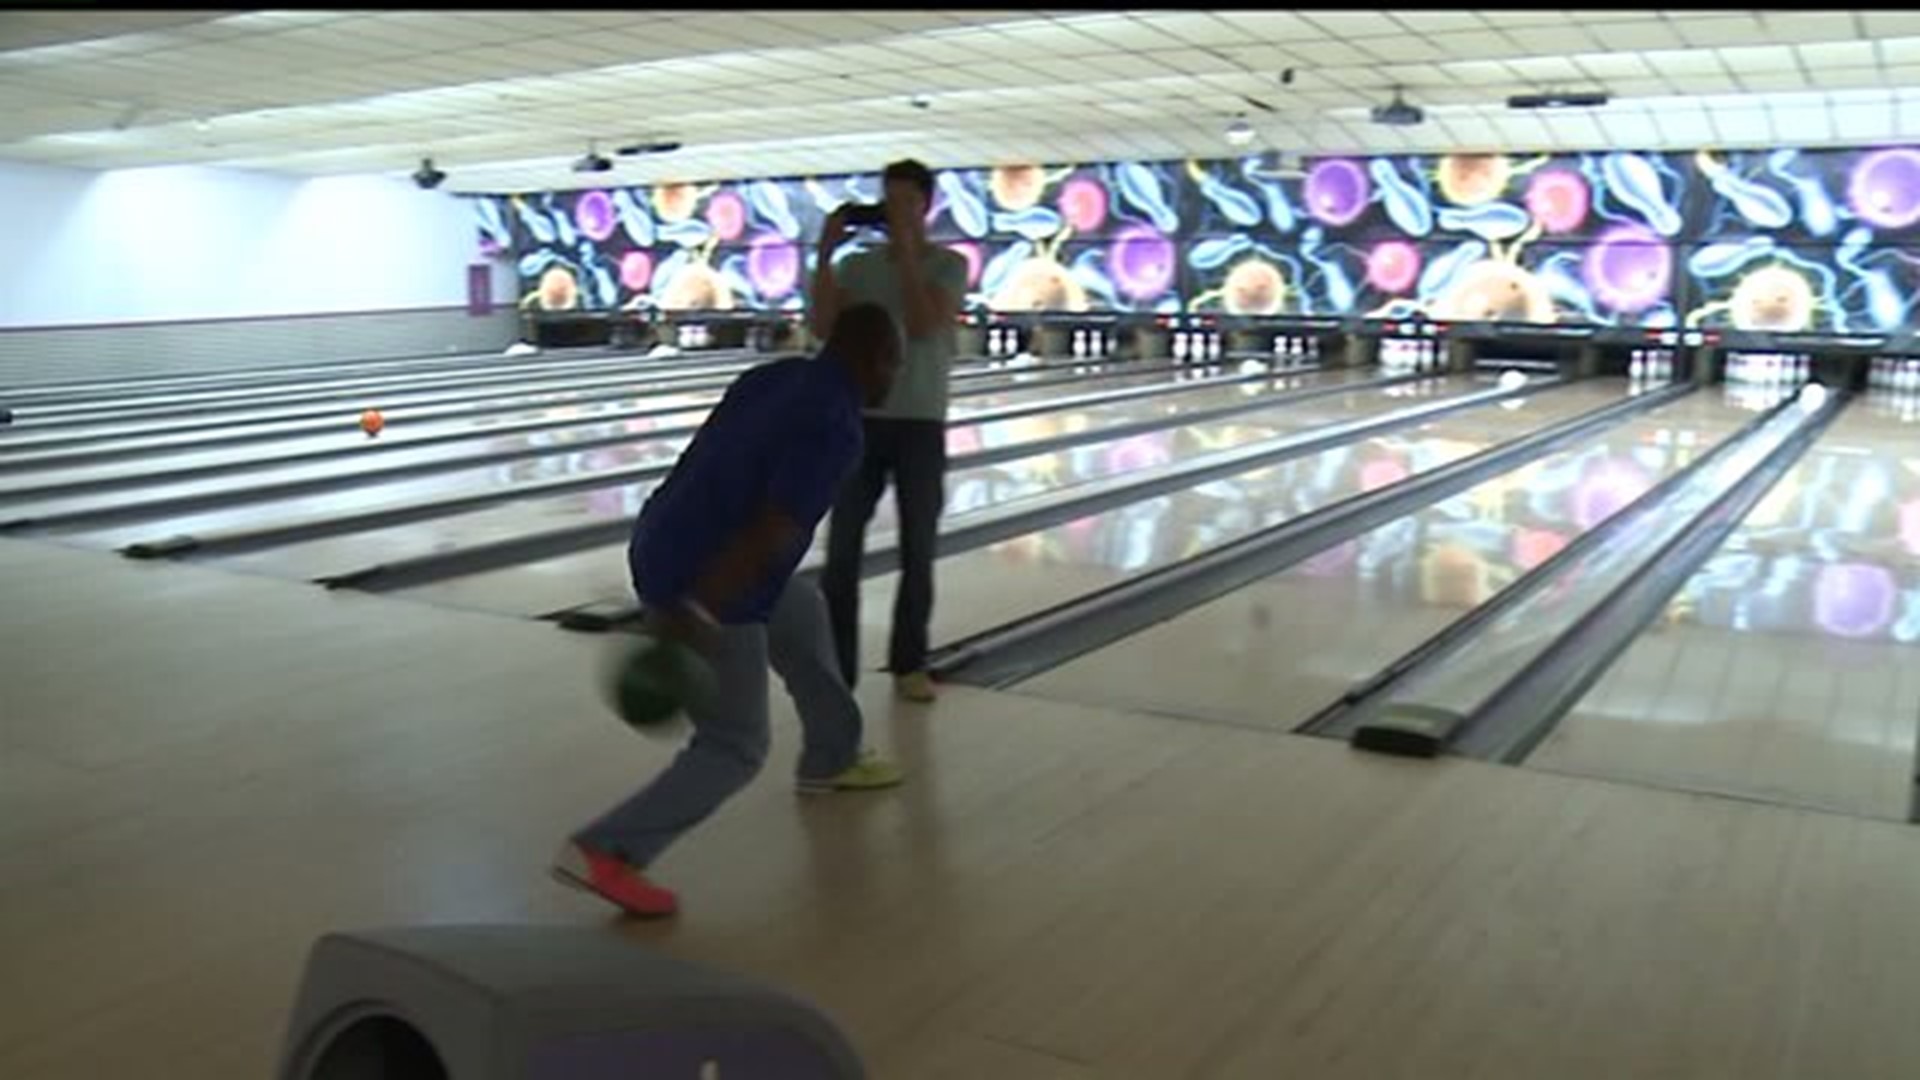 "Lanes For Lives" event raises money for American Red Cross